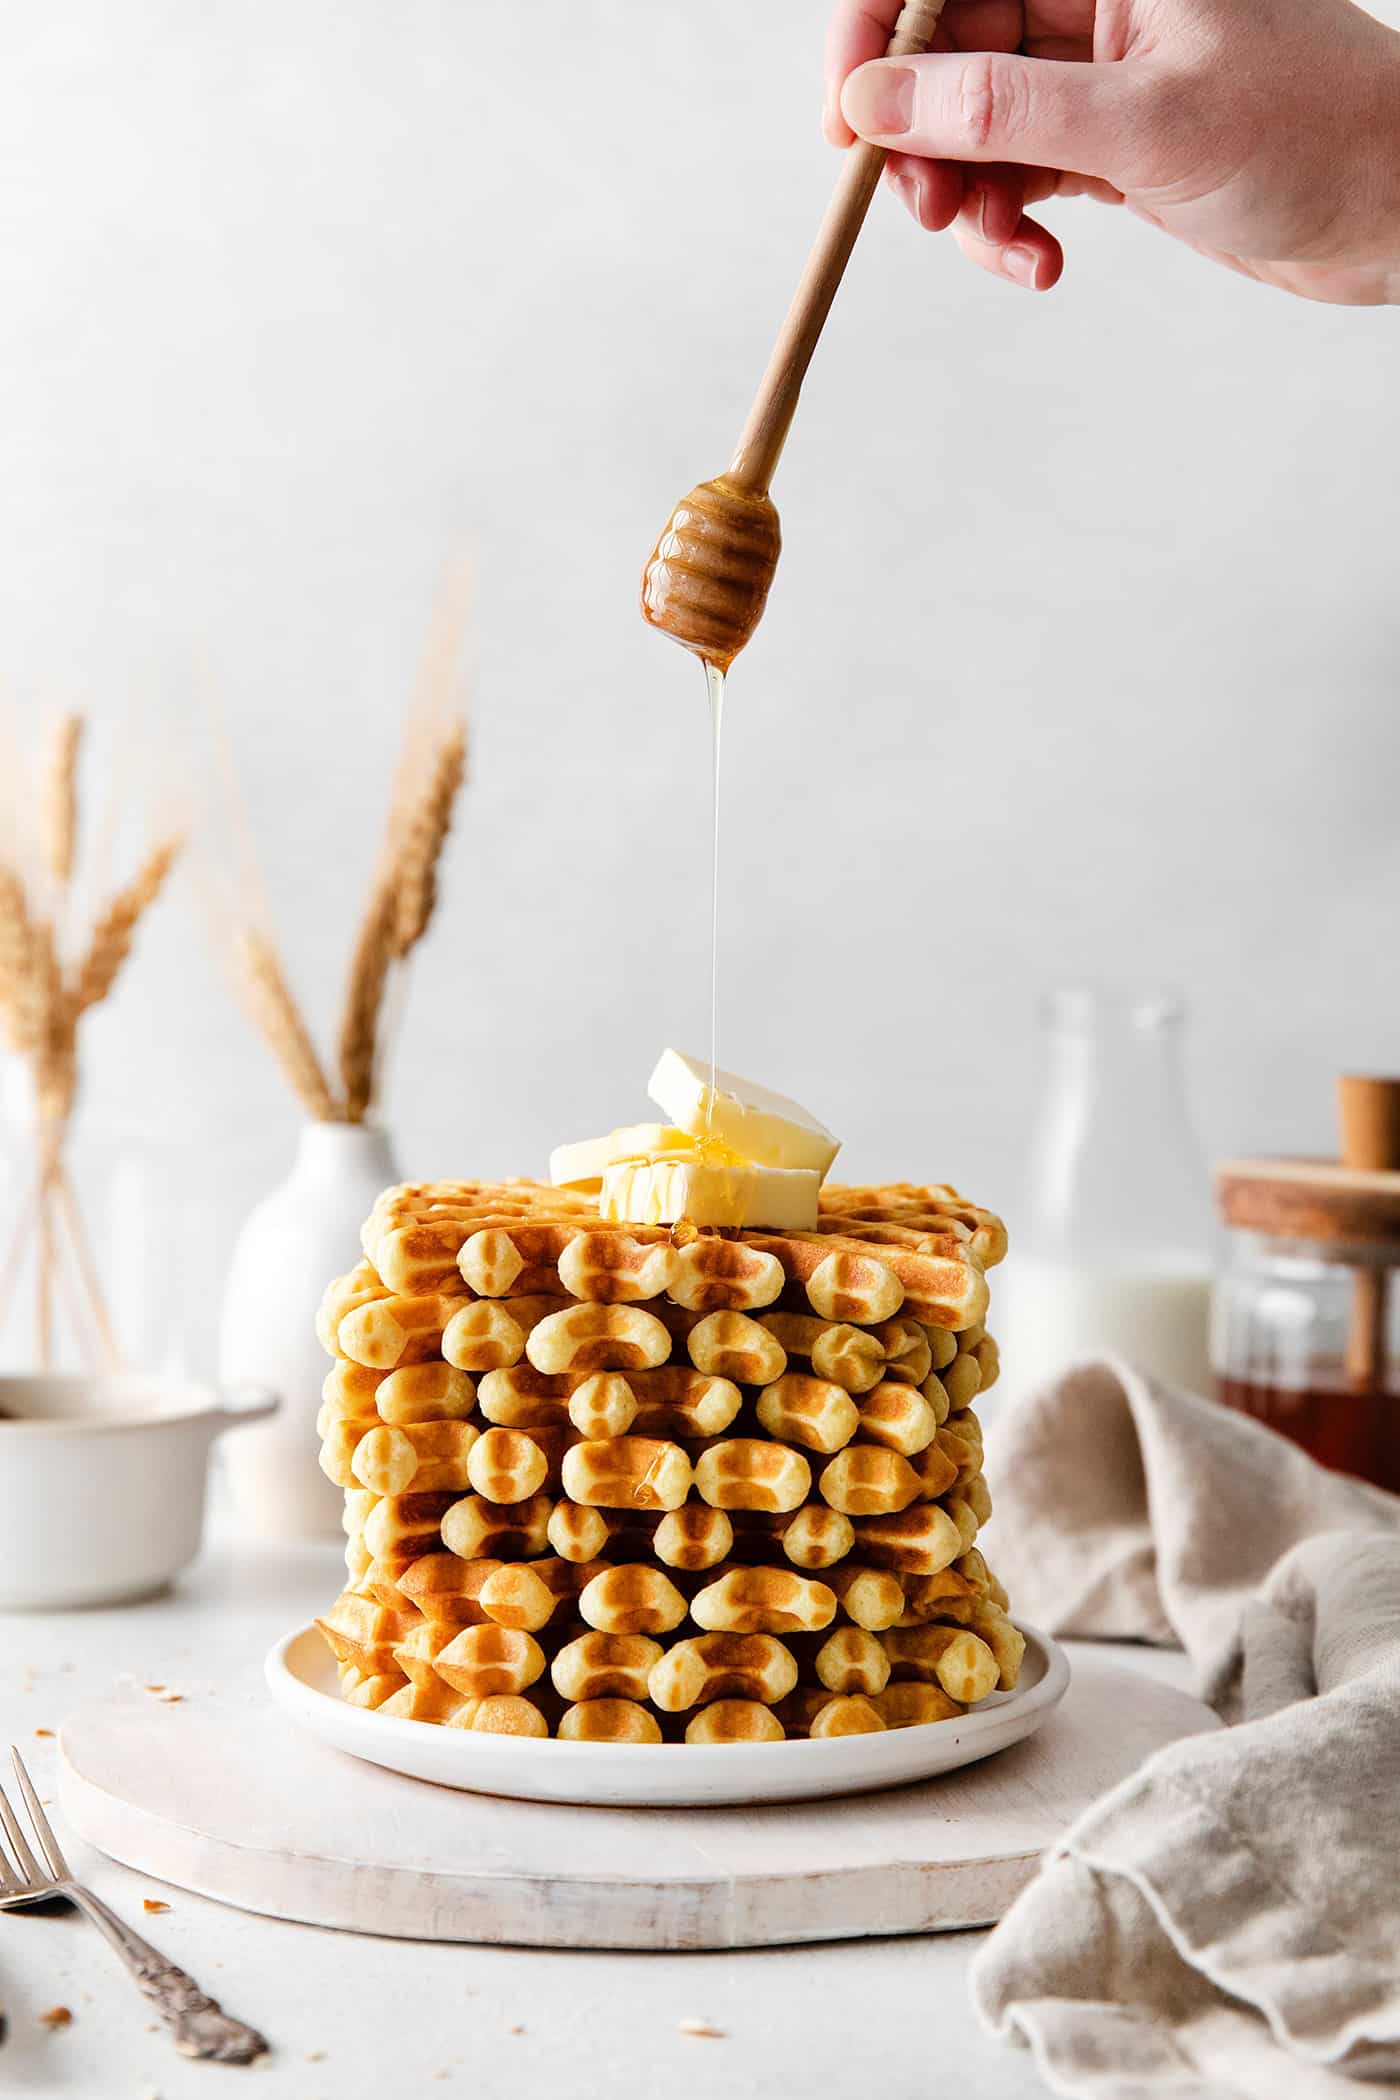 Honey being drizzled over the top of buttermilk waffles